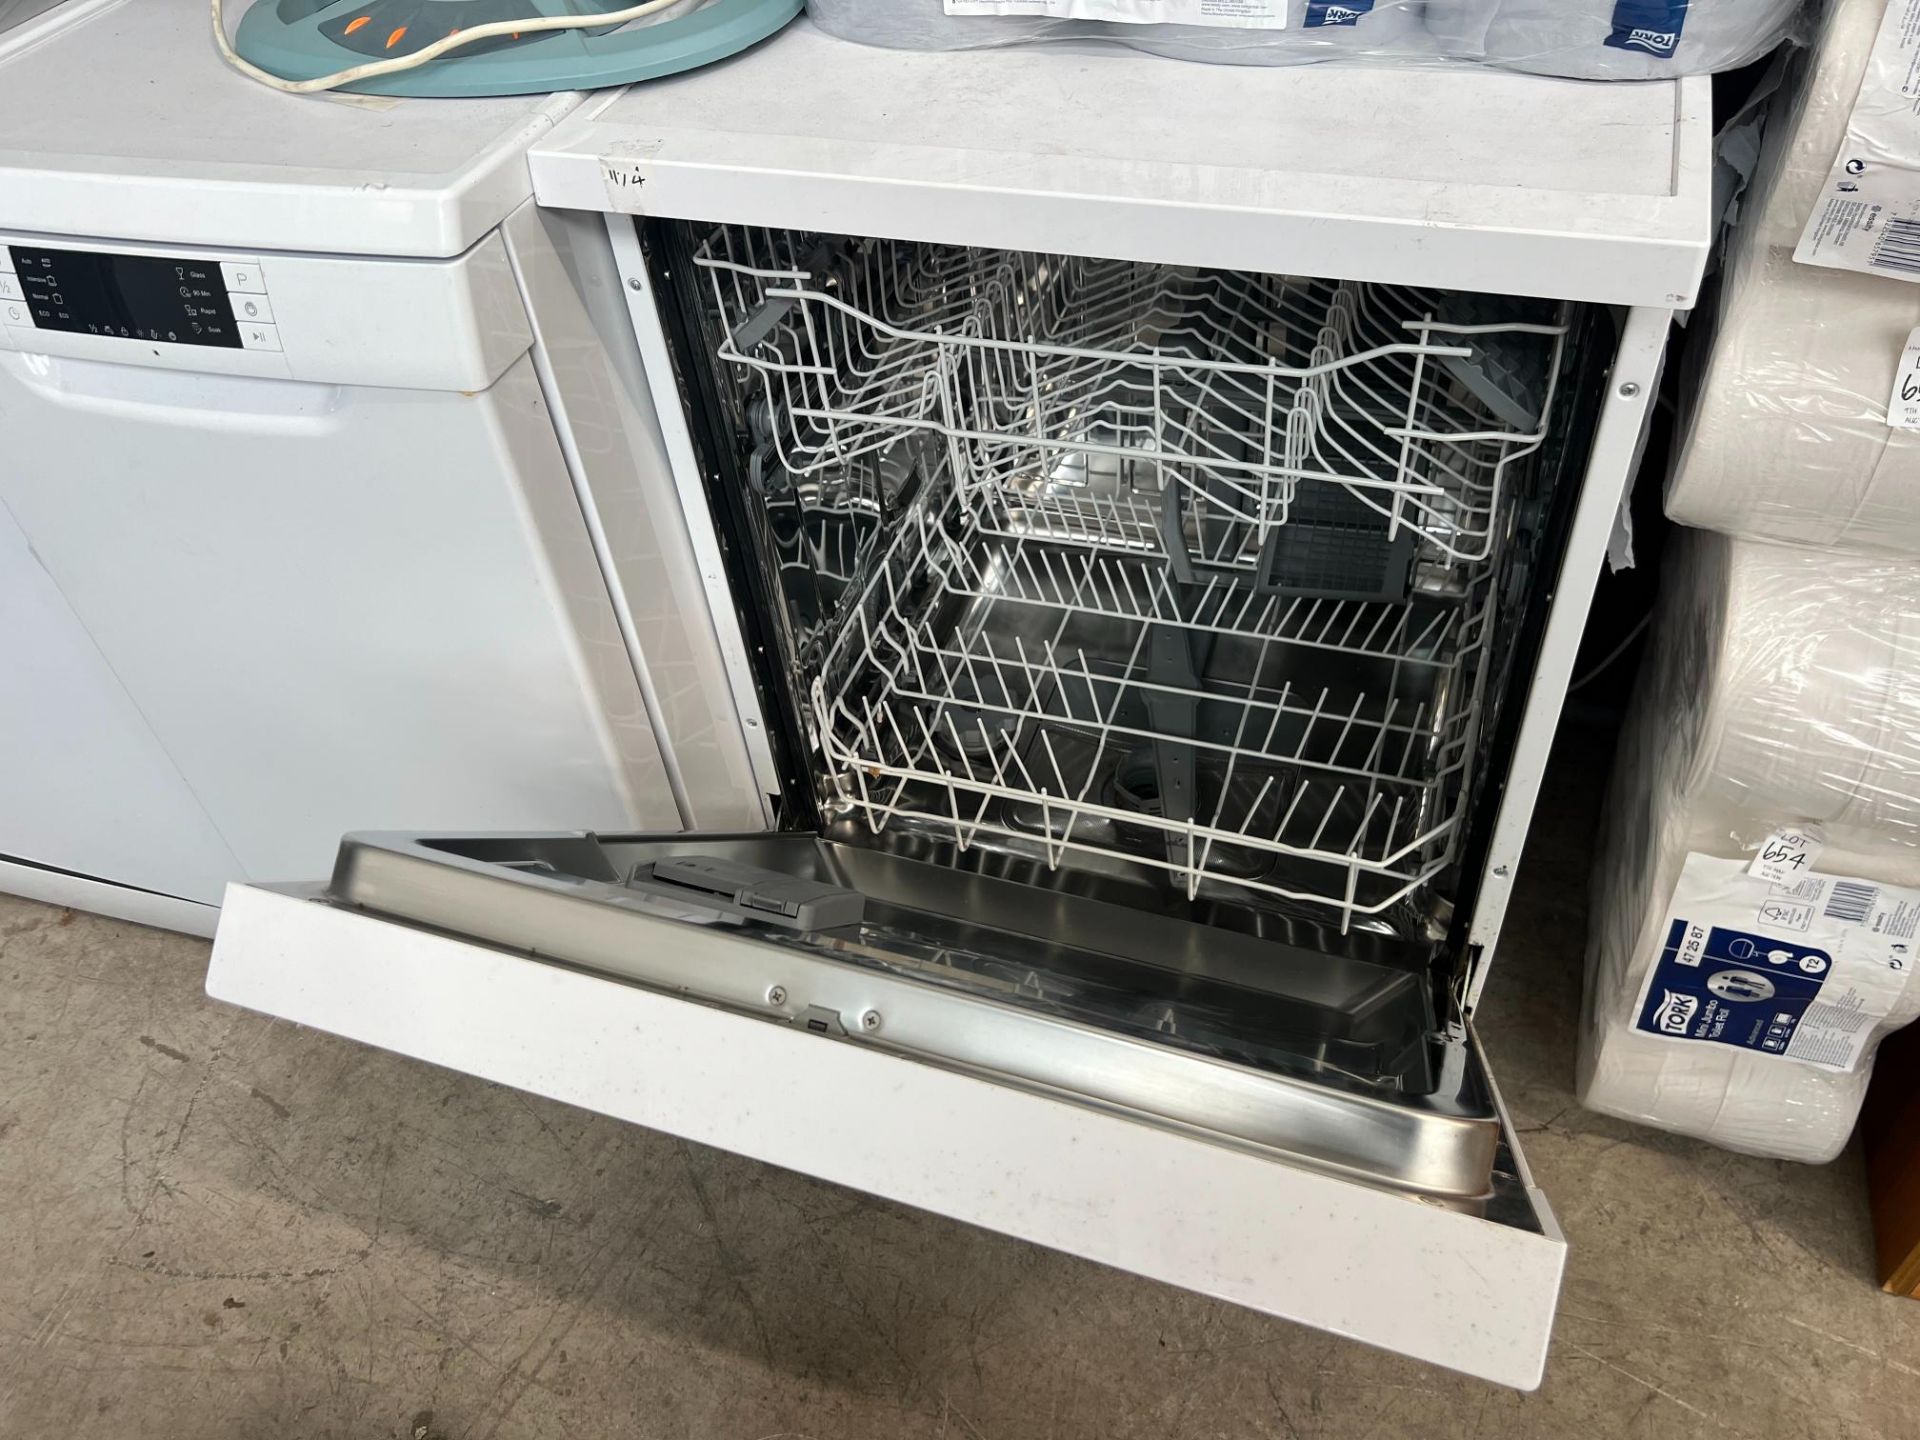 WHITE ESSENTIALS CDW60W18 DISHWASHER (HAMMER VAT TO BE ADDED TO THIS ITEM)